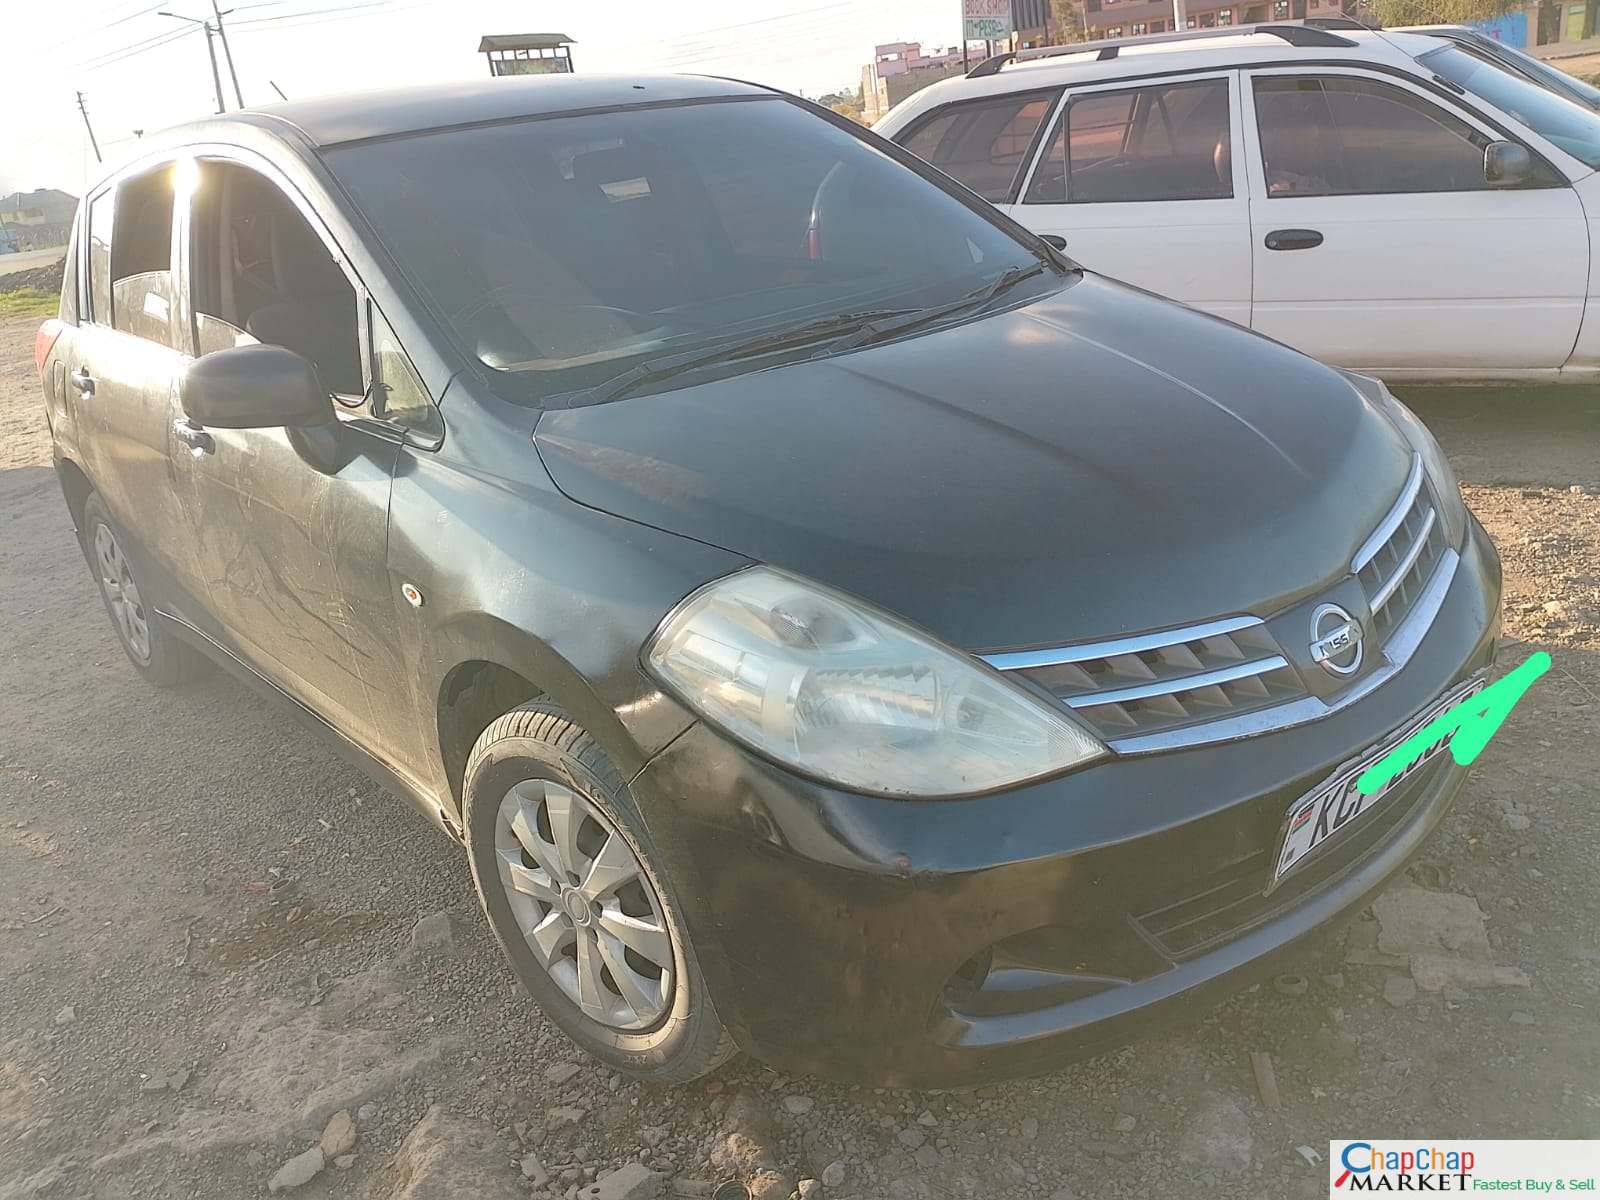 Nissan Tiida hatchback QUICK SALE You ONLY Pay 30% Deposit Trade in Ok EXCLUSIVE